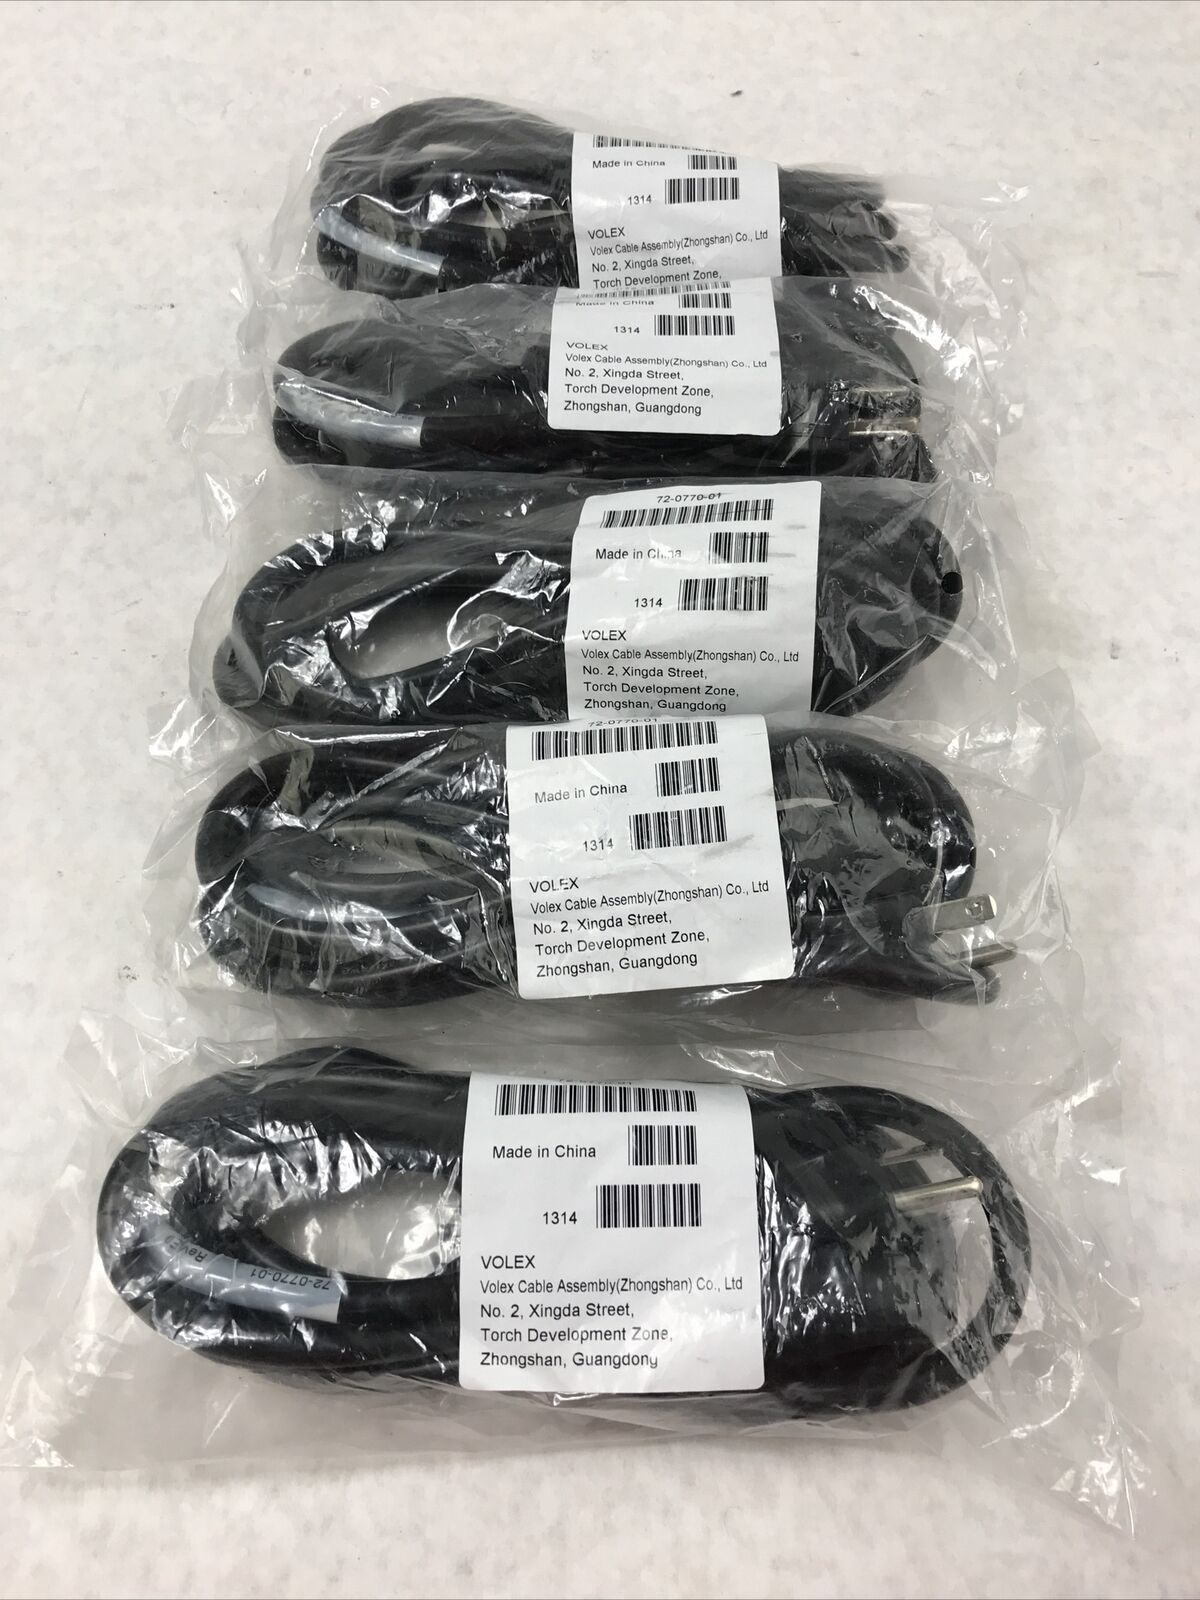 Lot of 5 Volex 72-0770-01 Cable Assembly Hog Nose Power Cords